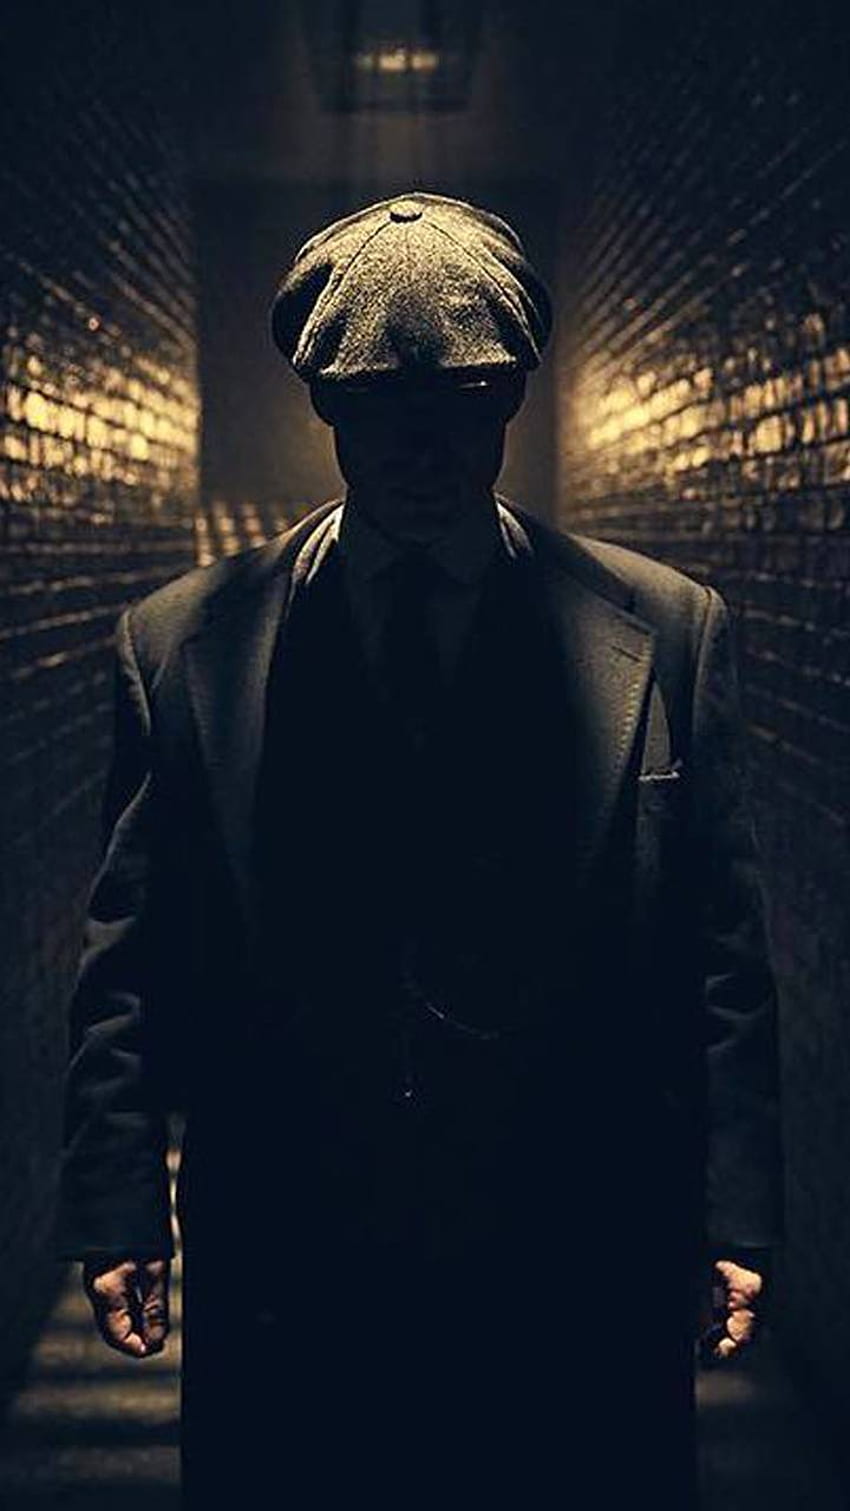 Wallpapers for you! : r/PeakyBlinders